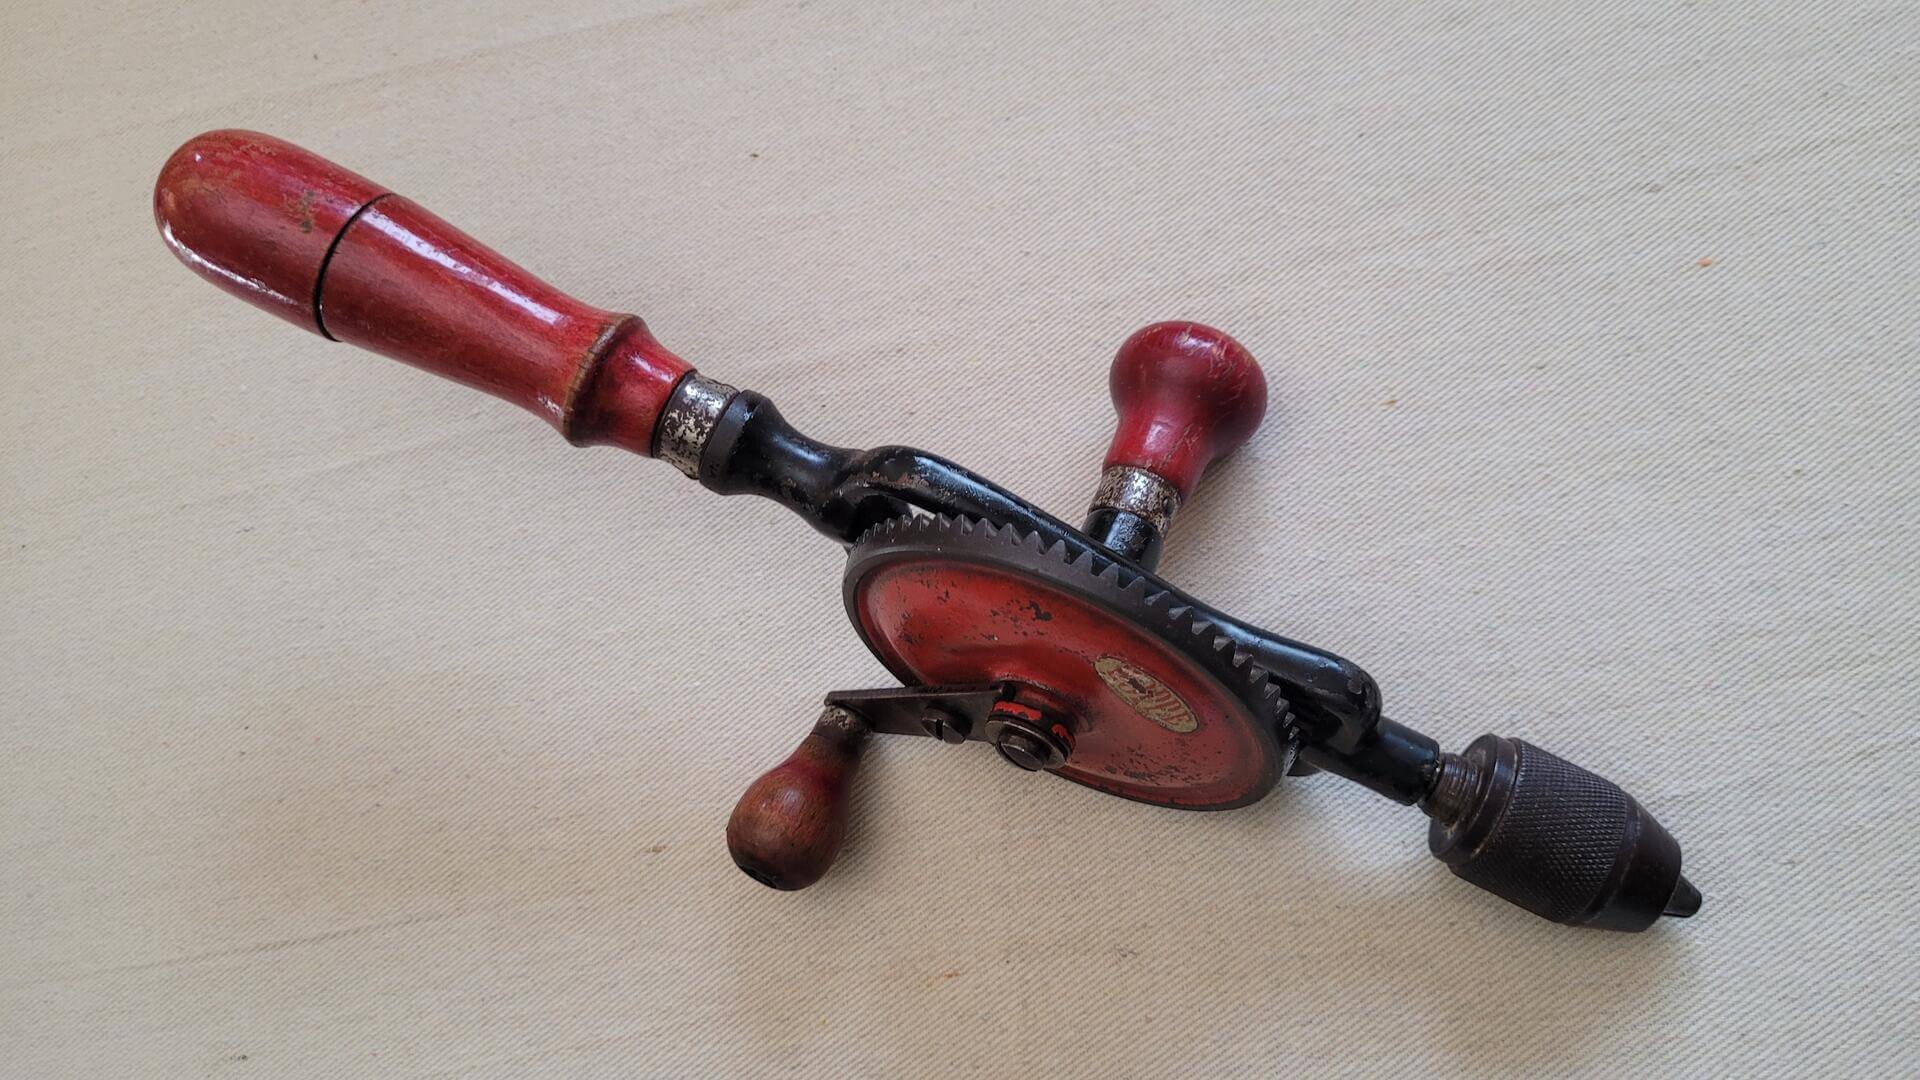 Vintage woodworking Hoppe egg beater style hand drill with red wooden handle. Rare antique made in Germany collectible carpentry hand tool